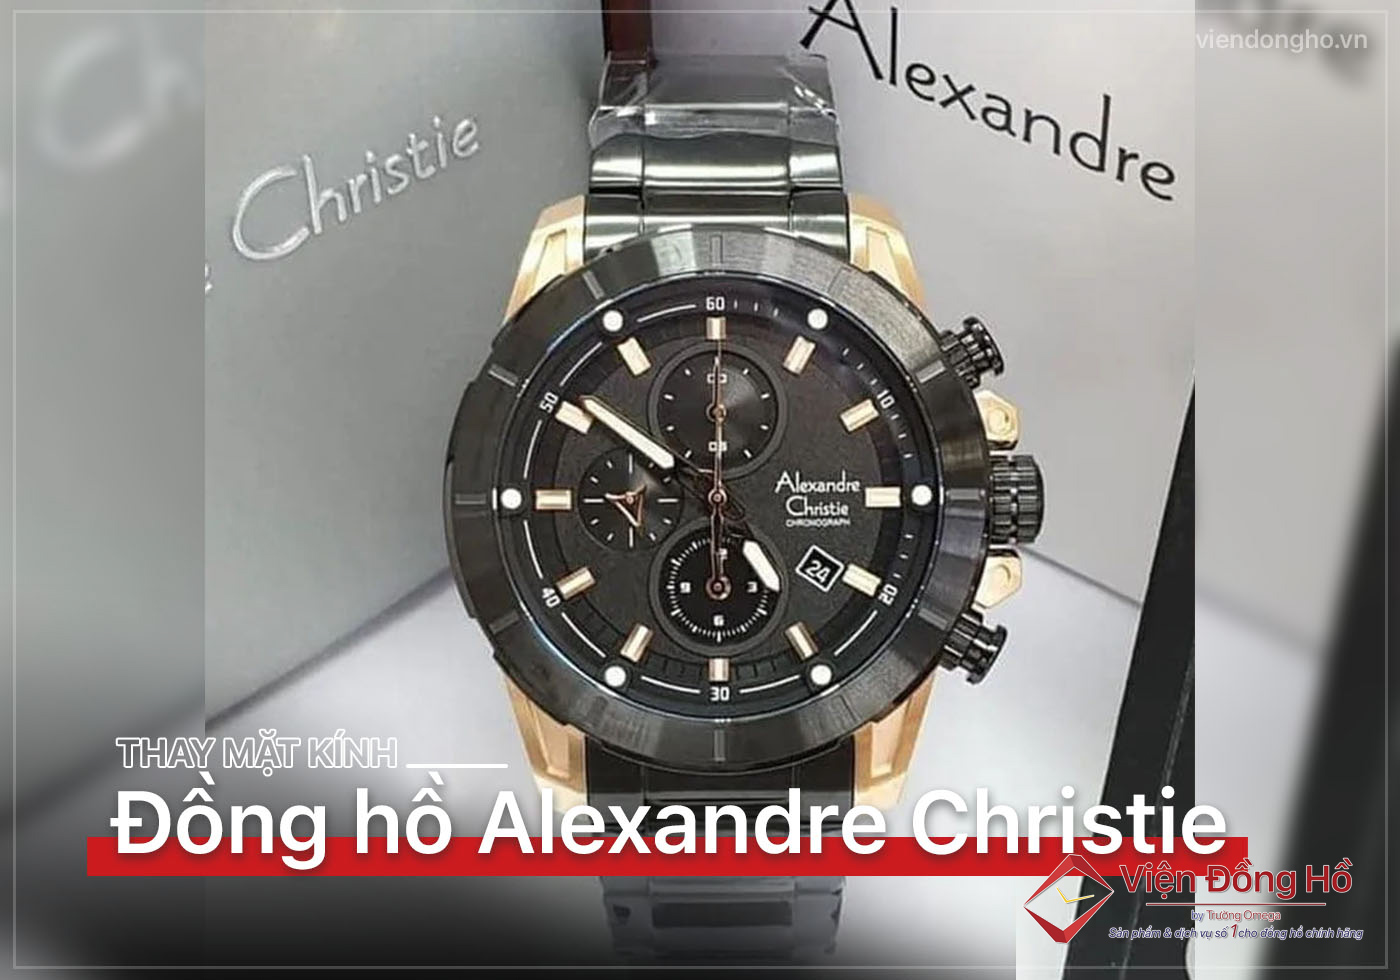 Thay mat kinh dong ho Alexandre Christie 5